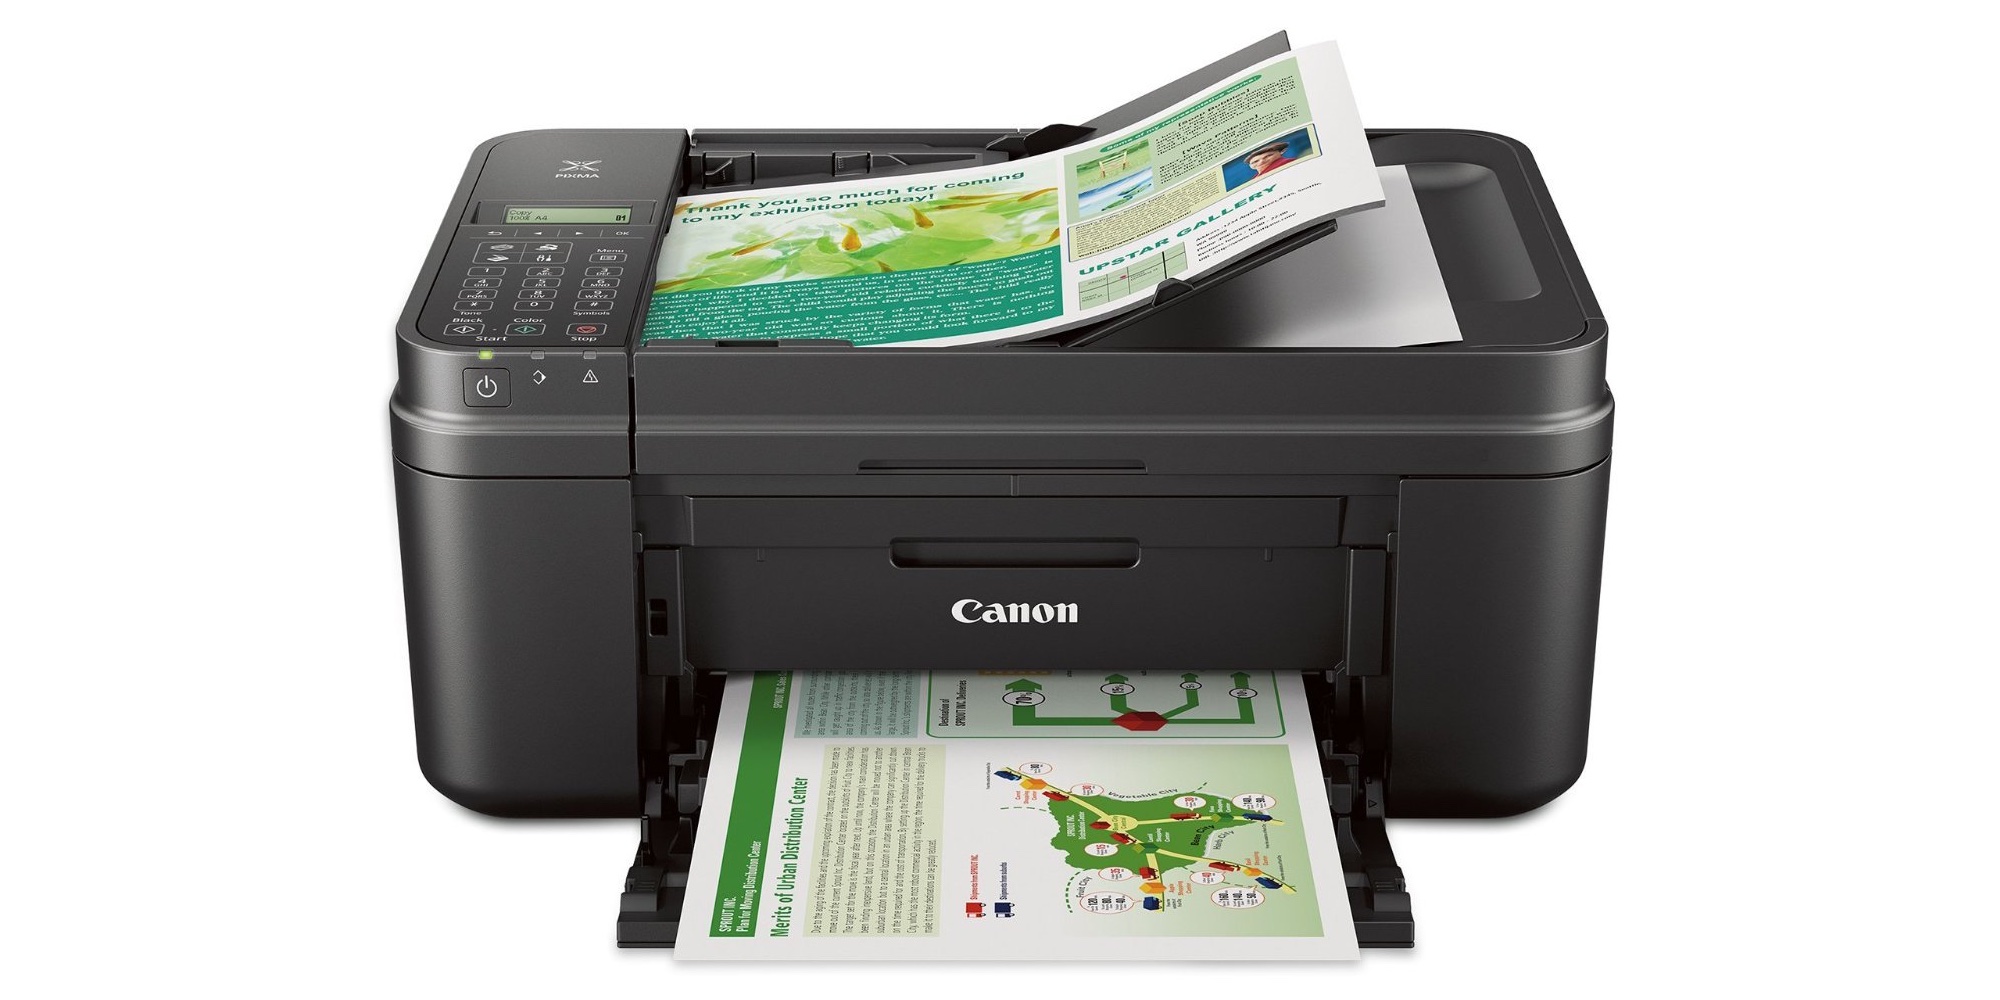 Equipped with AirPrint, Canon's PIXMA Printer falls to $35 shipped (Reg.  $50)